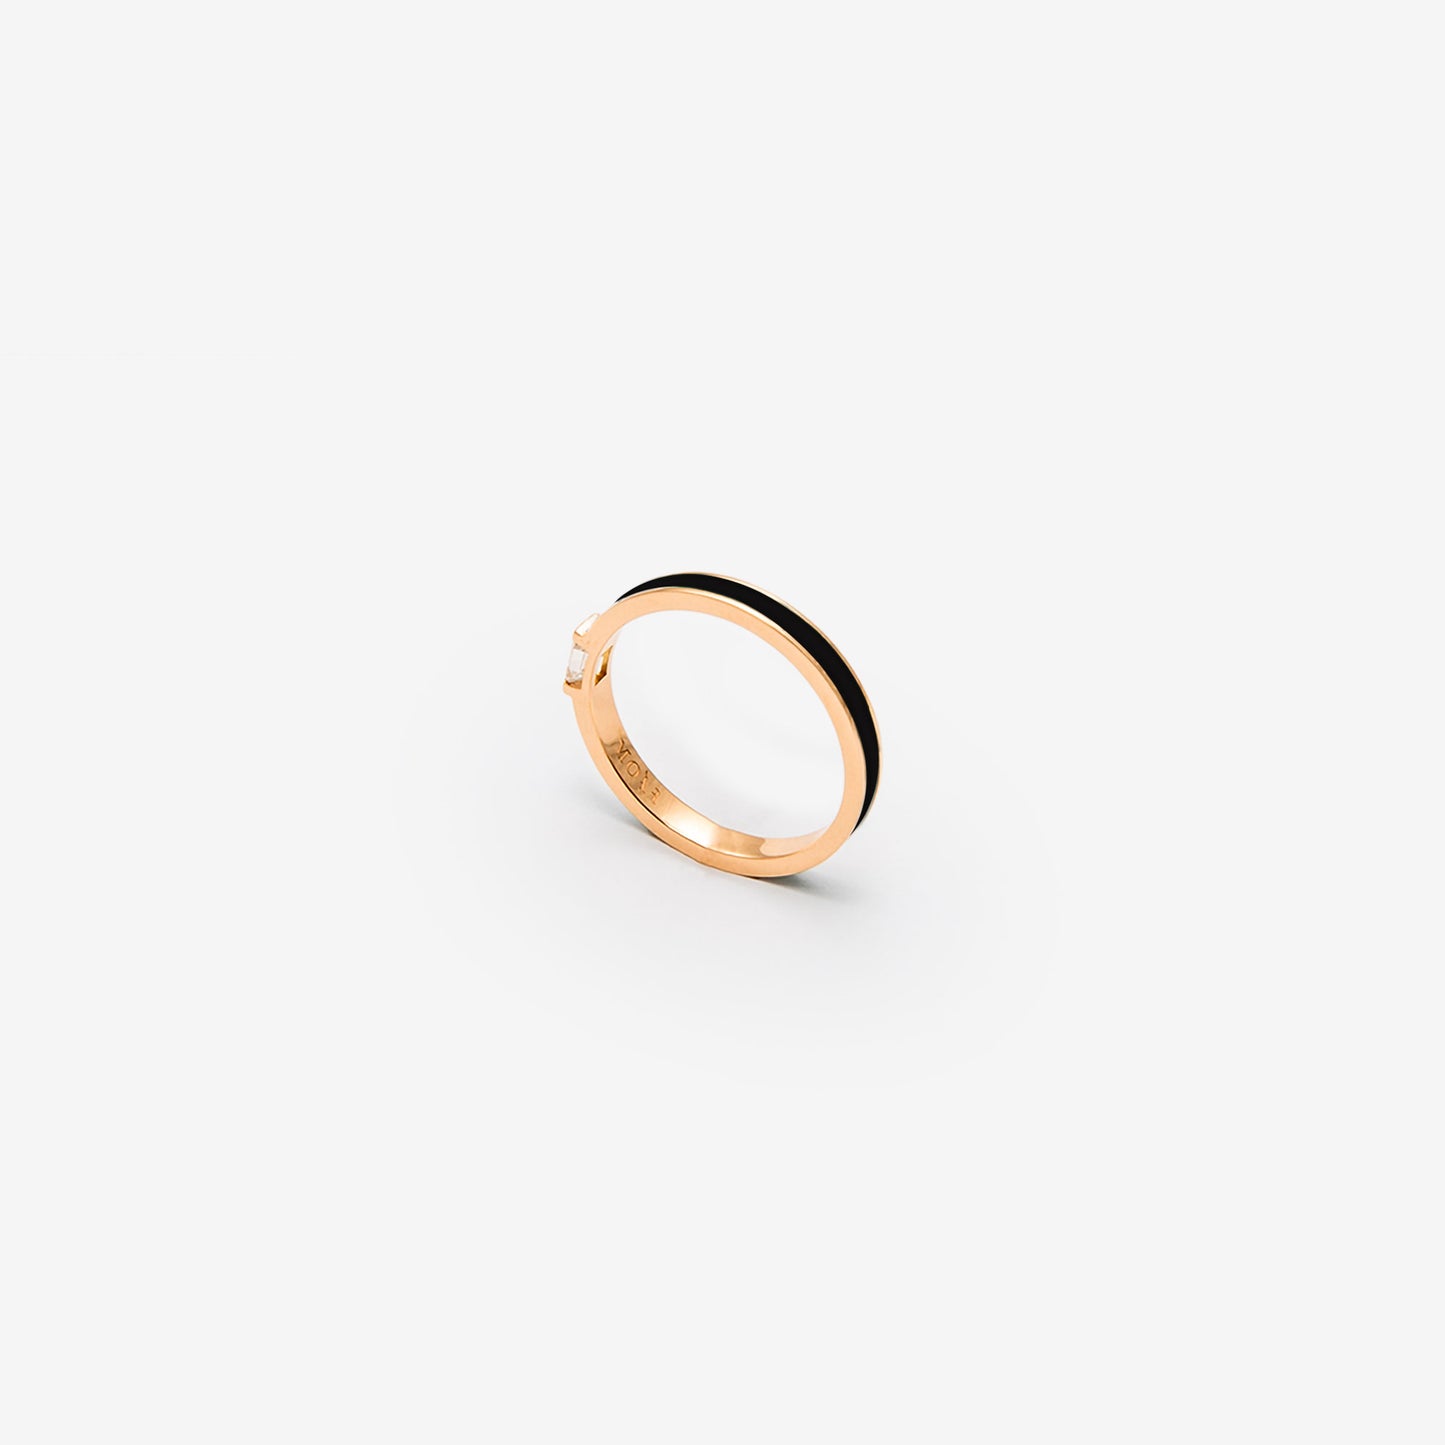 Rose gold band with black enamel and a diamond